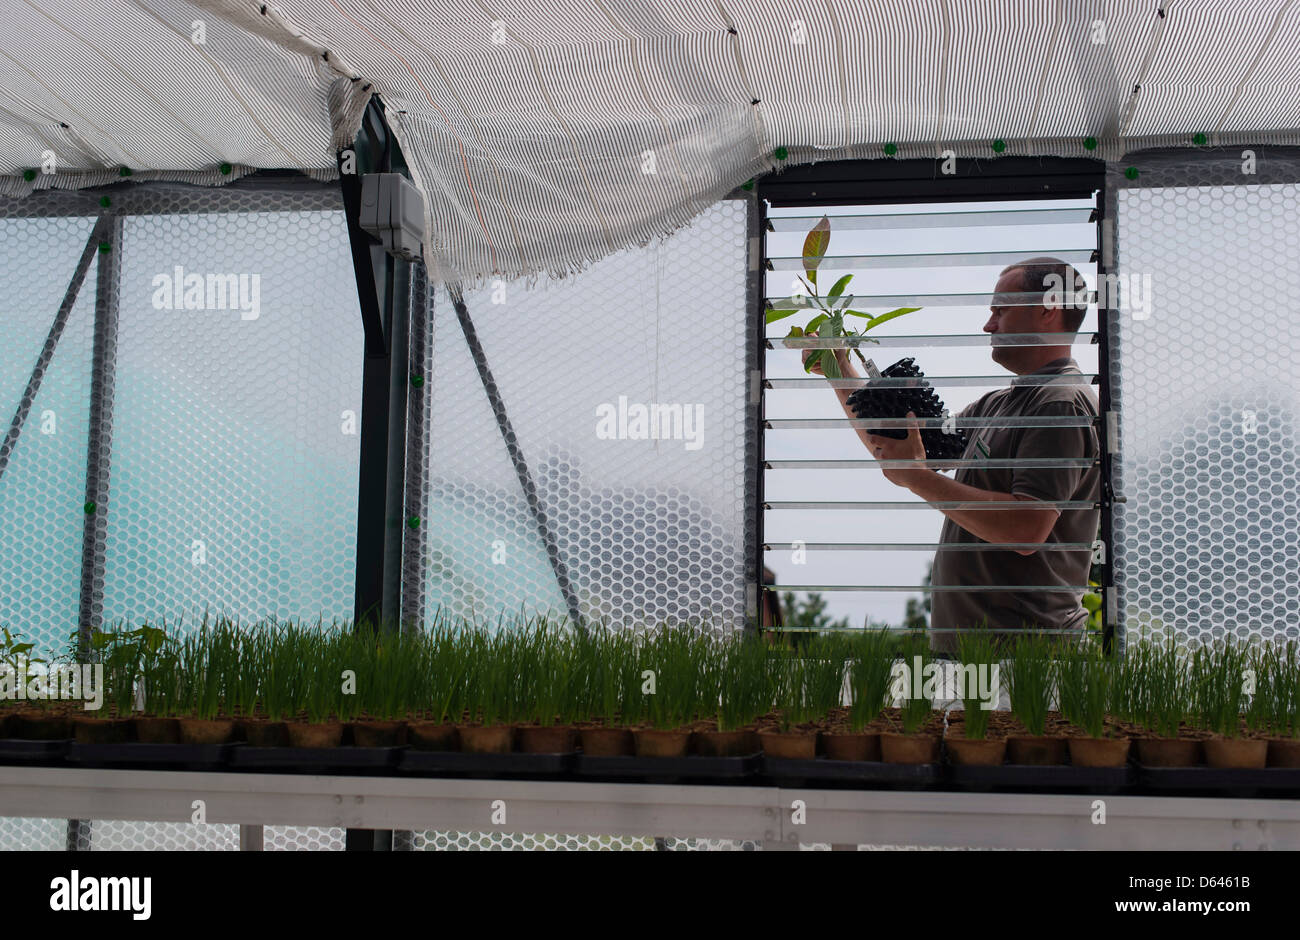 A gardener checking a plant in a nursery greenhouse Stock Photo